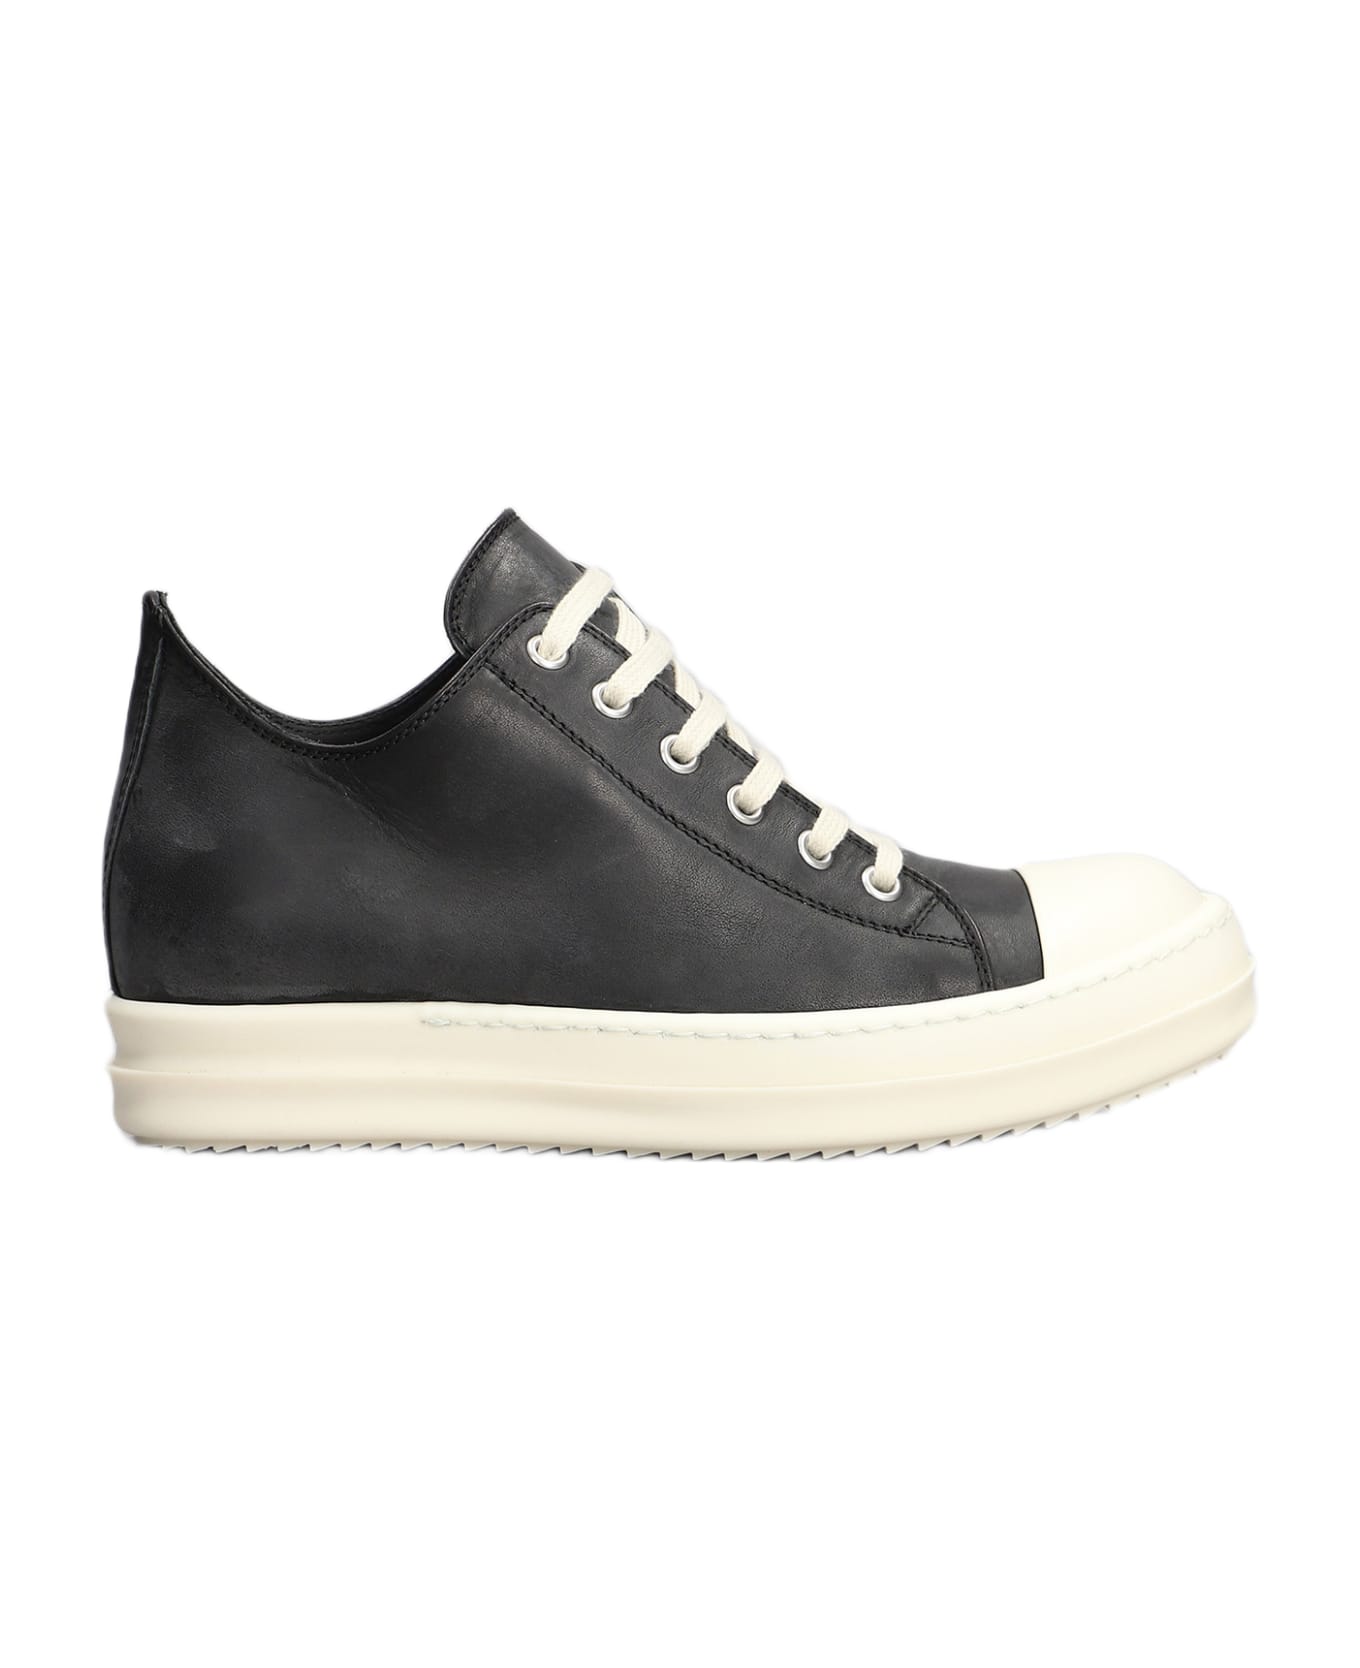 Rick Owens Round-toe Lace-up Sneakers - black スニーカー